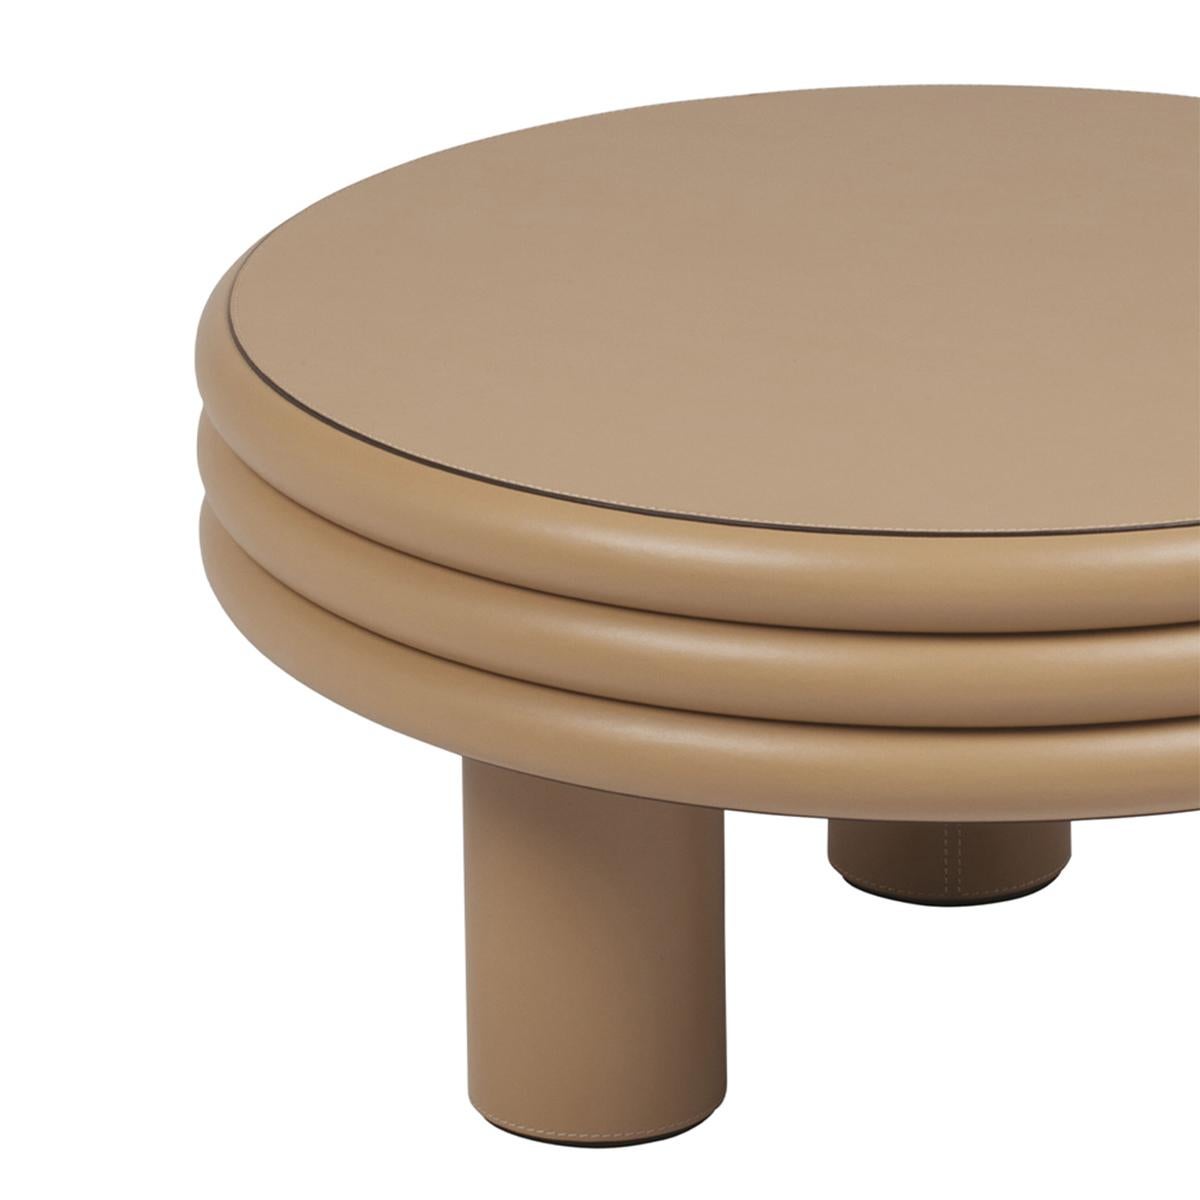 Coffee table Catane with structure in
solid wood and covered with beige
genuine leather.
Also available with other leather colors on request.